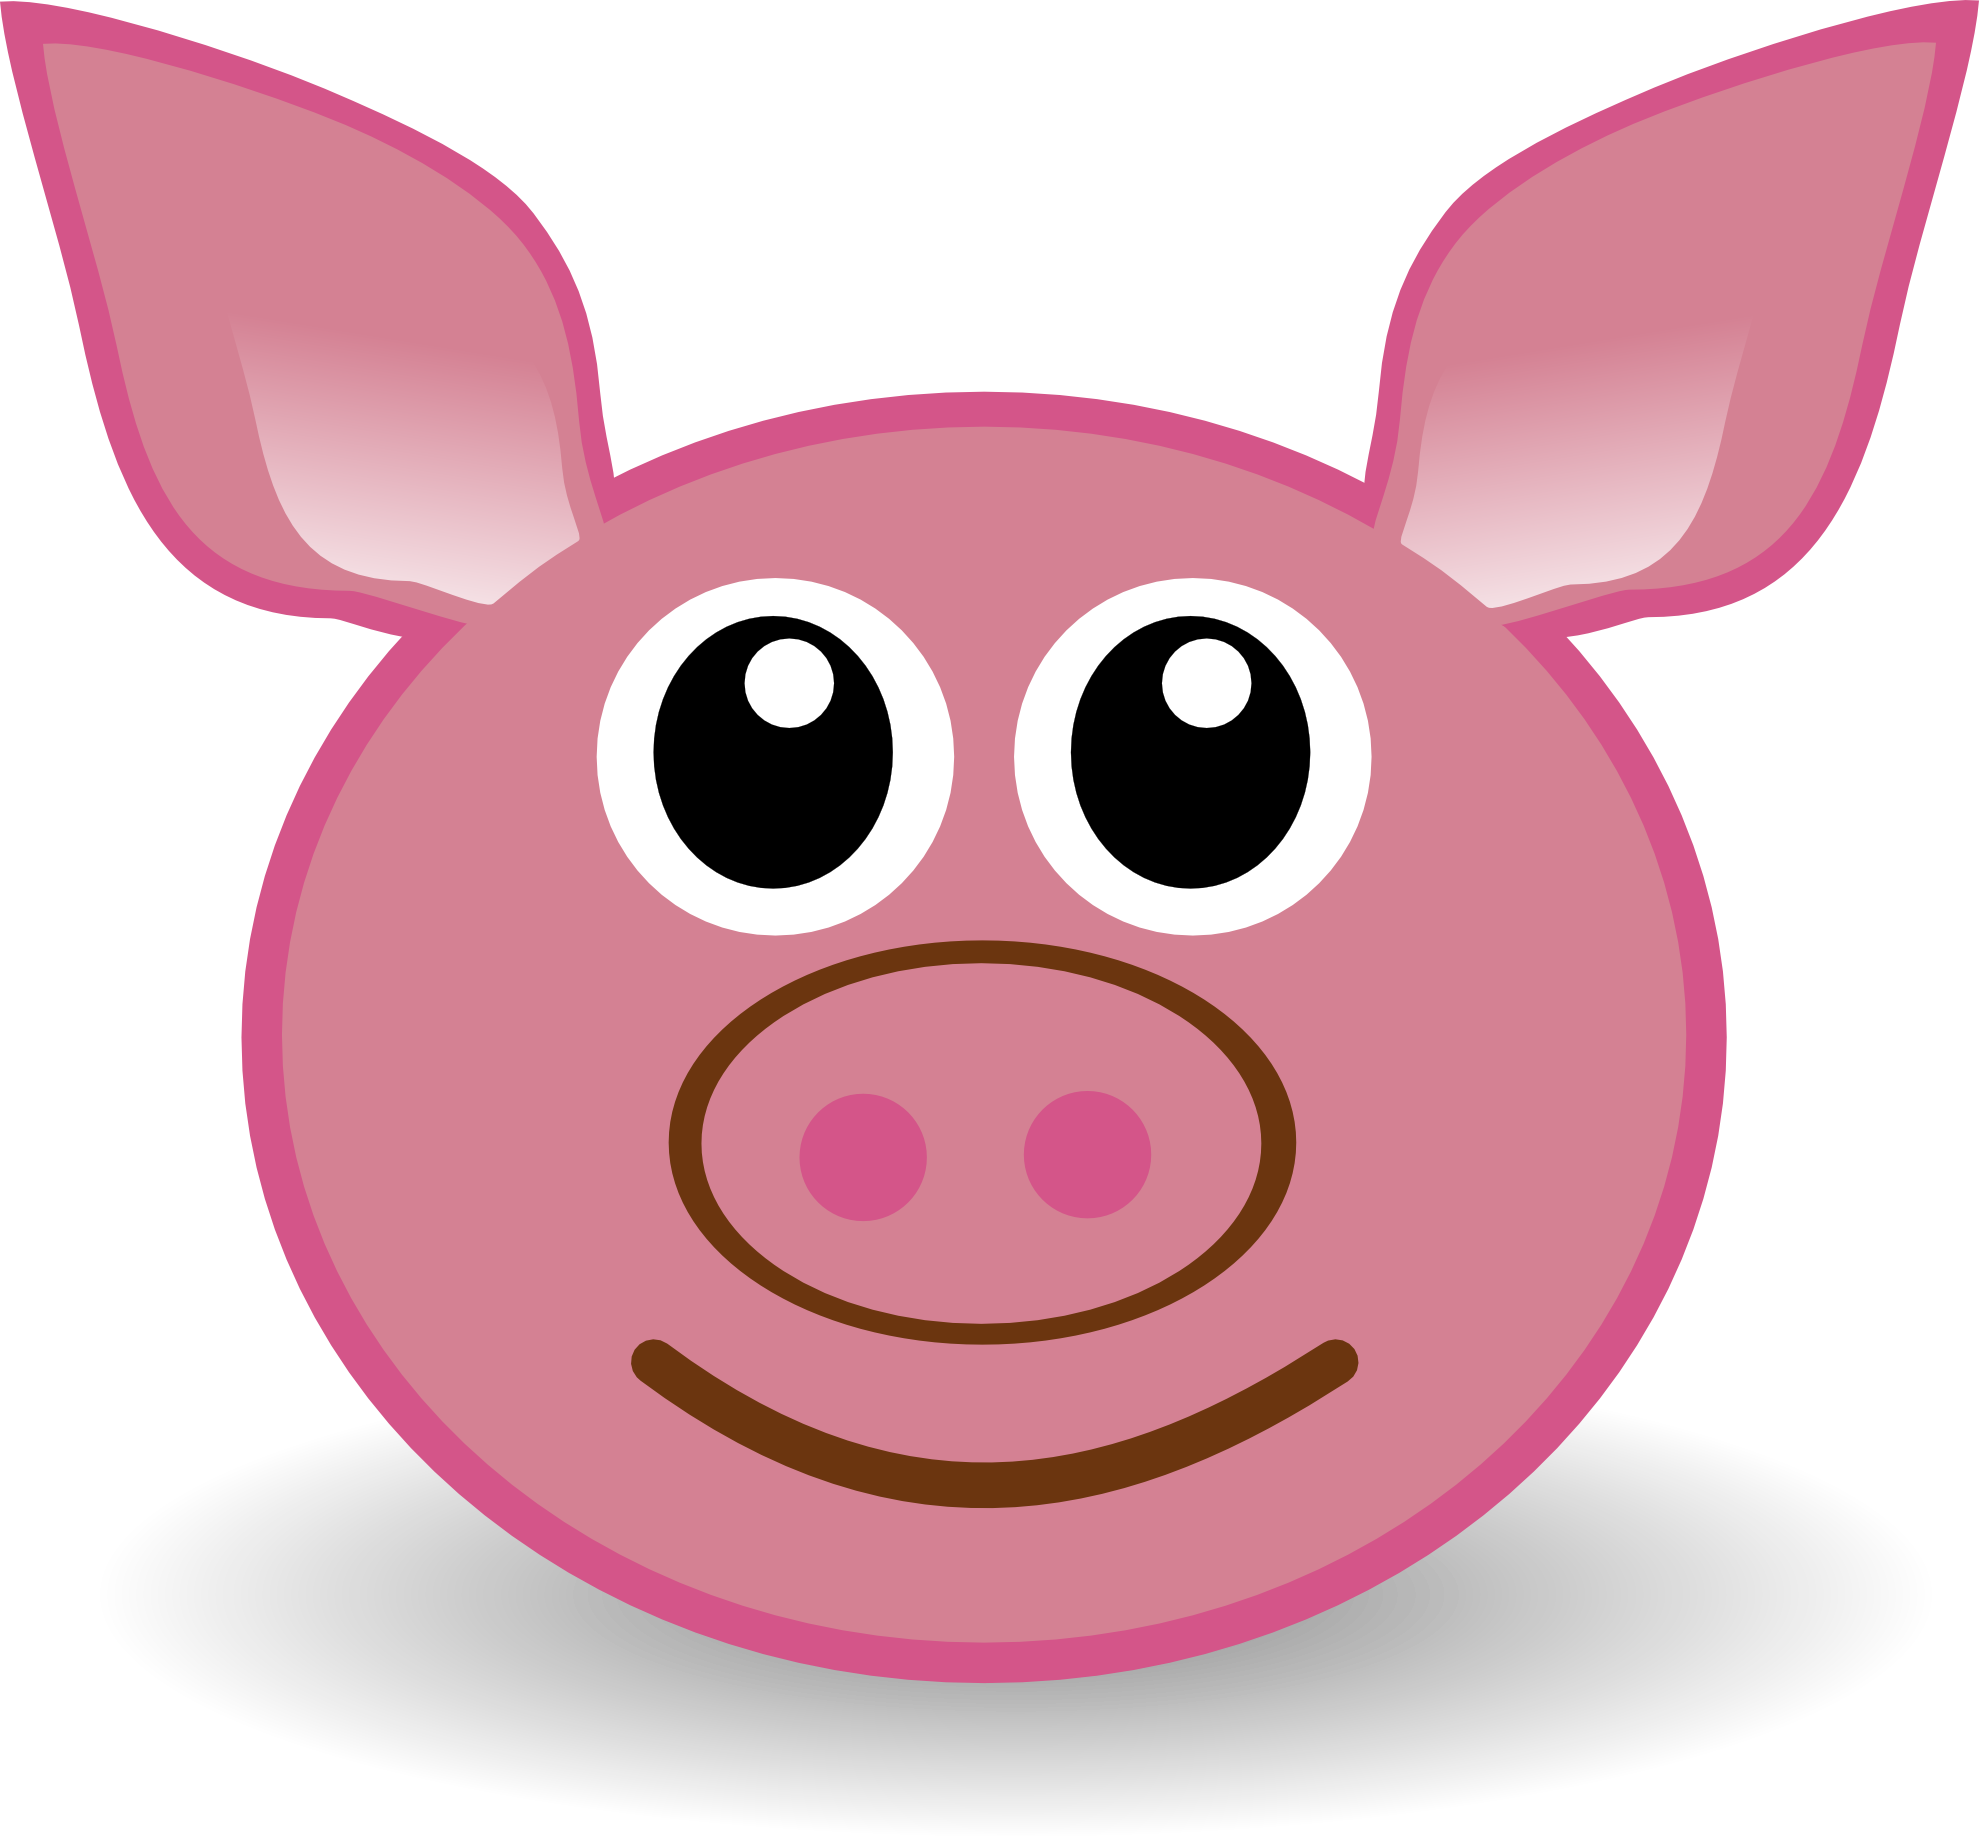 Cartoon Pig Faces - Clipart library